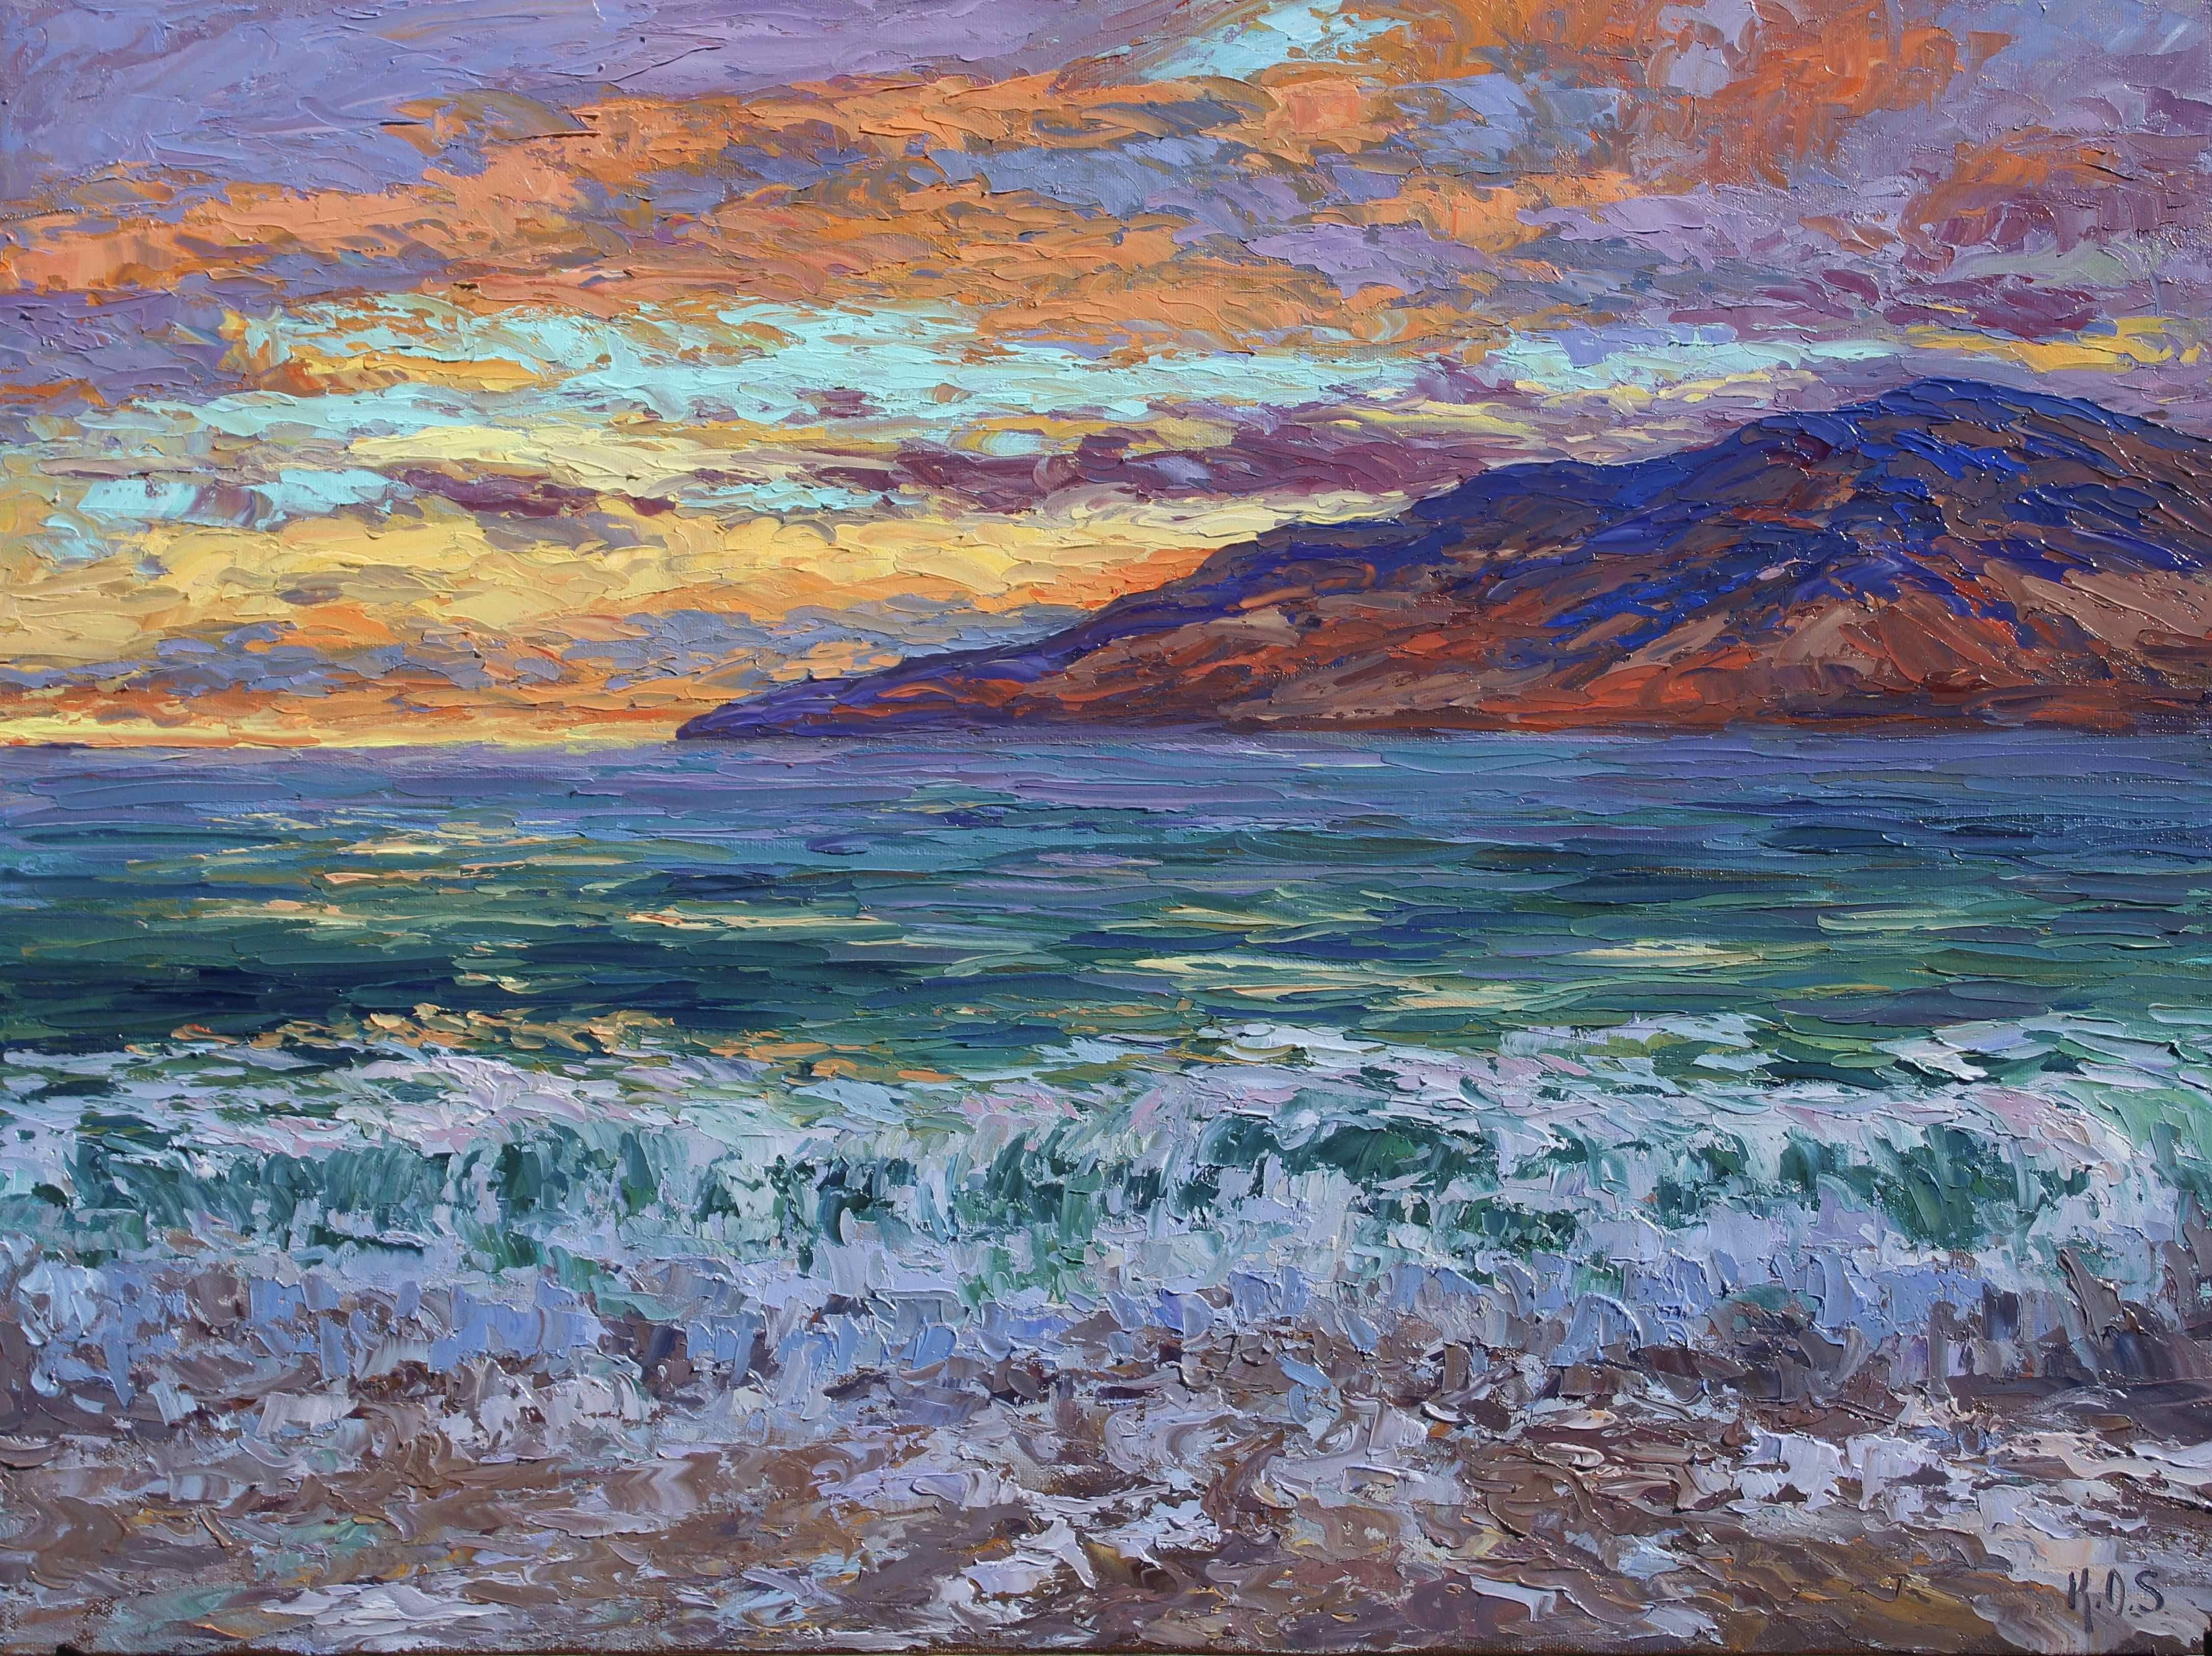 An original Maui, Hawaii seascape textured oil painting on canvas. This painting features thick strokes of paint giving the artwork a contemporary feeling. It draws you in, to look at the details of the sparkle of evening light on the open ocean,